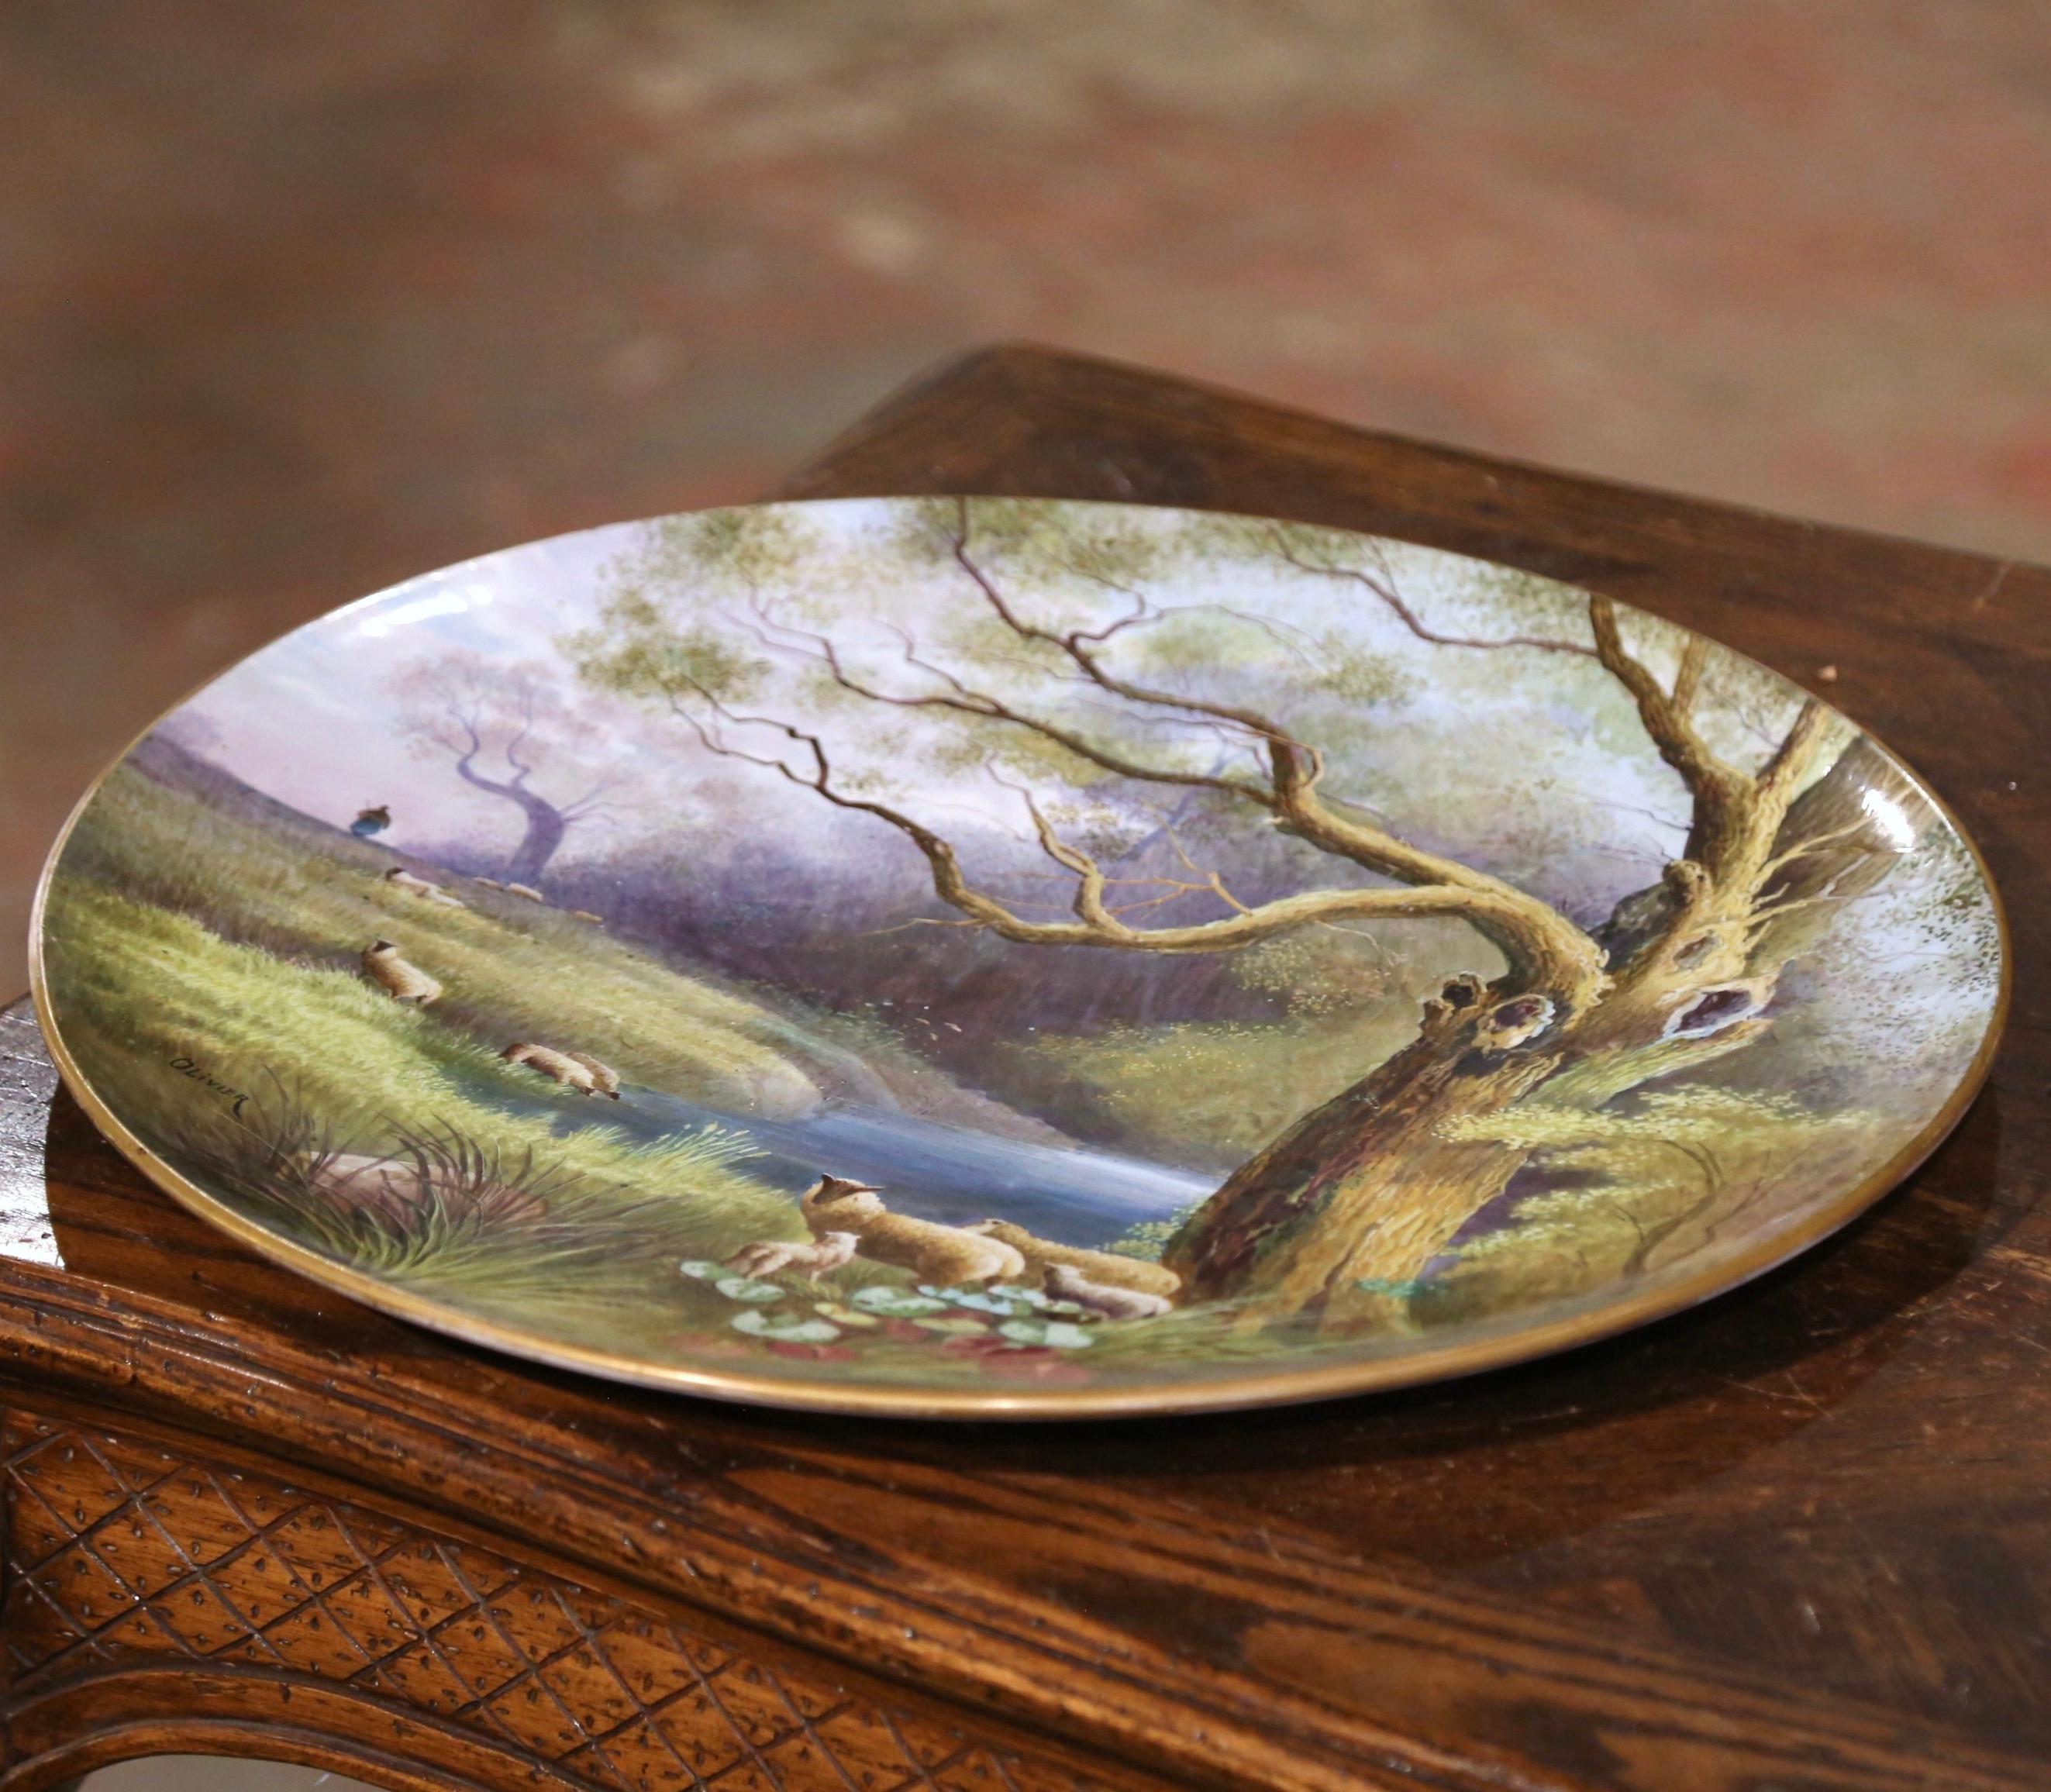 Decorate a kitchen wall, a breakfast room or a restaurant with this large and colorful antique platter. Crafted in France circa 1870 and round in shape, the charming hand painted porcelain plate features a country landscape scene with sheep grazing